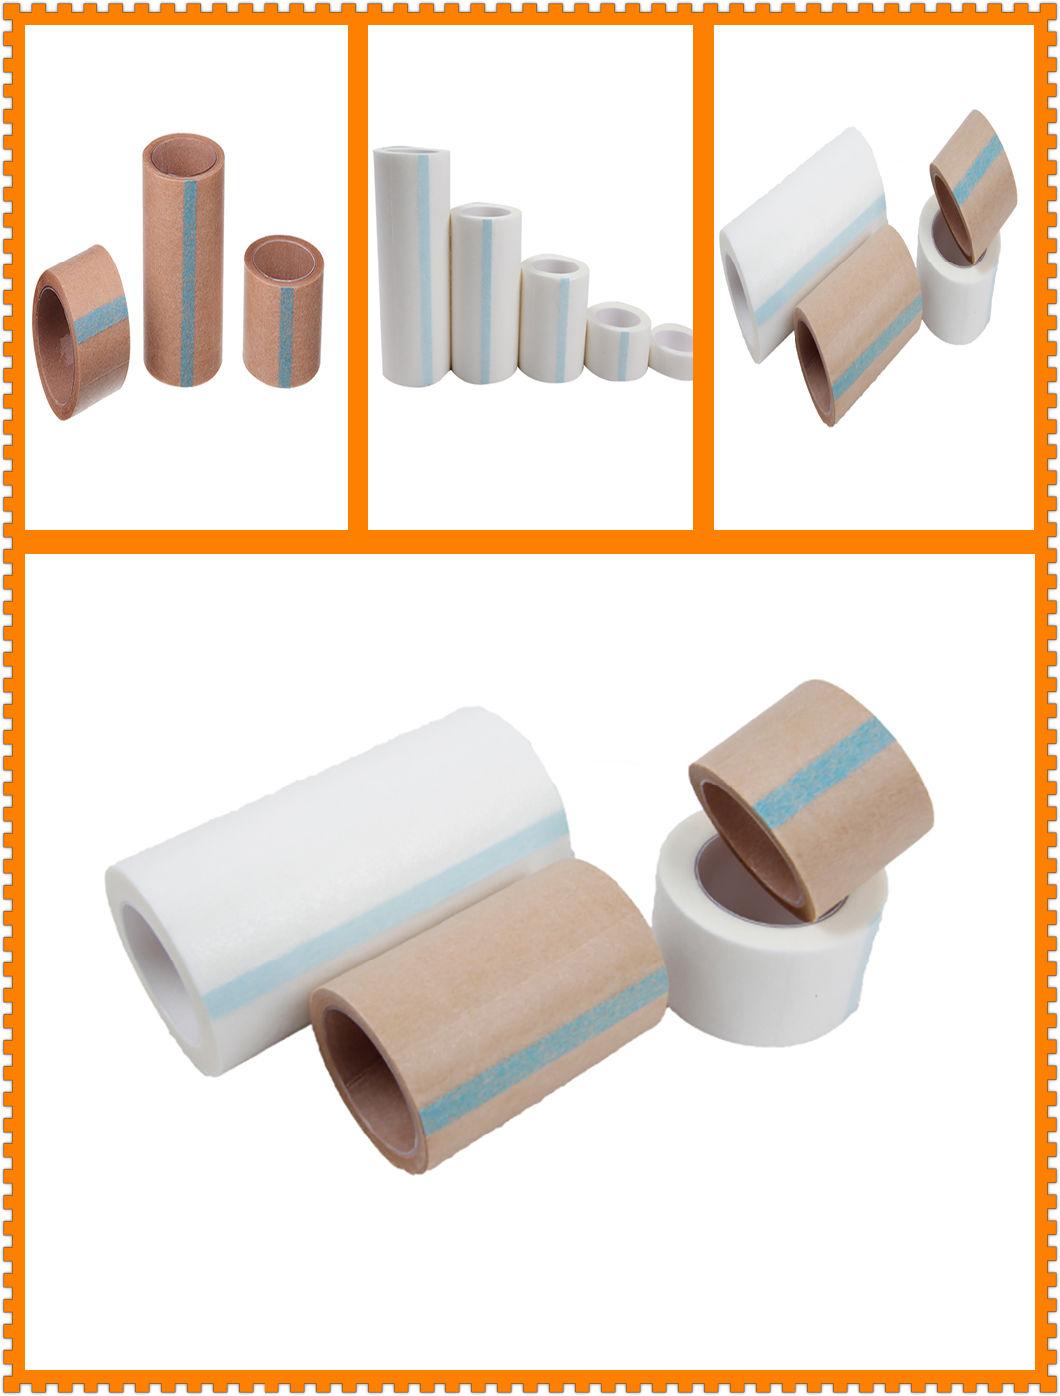 China Factory Directly Supply Medical Tape (Non-woven/Paper Tape)